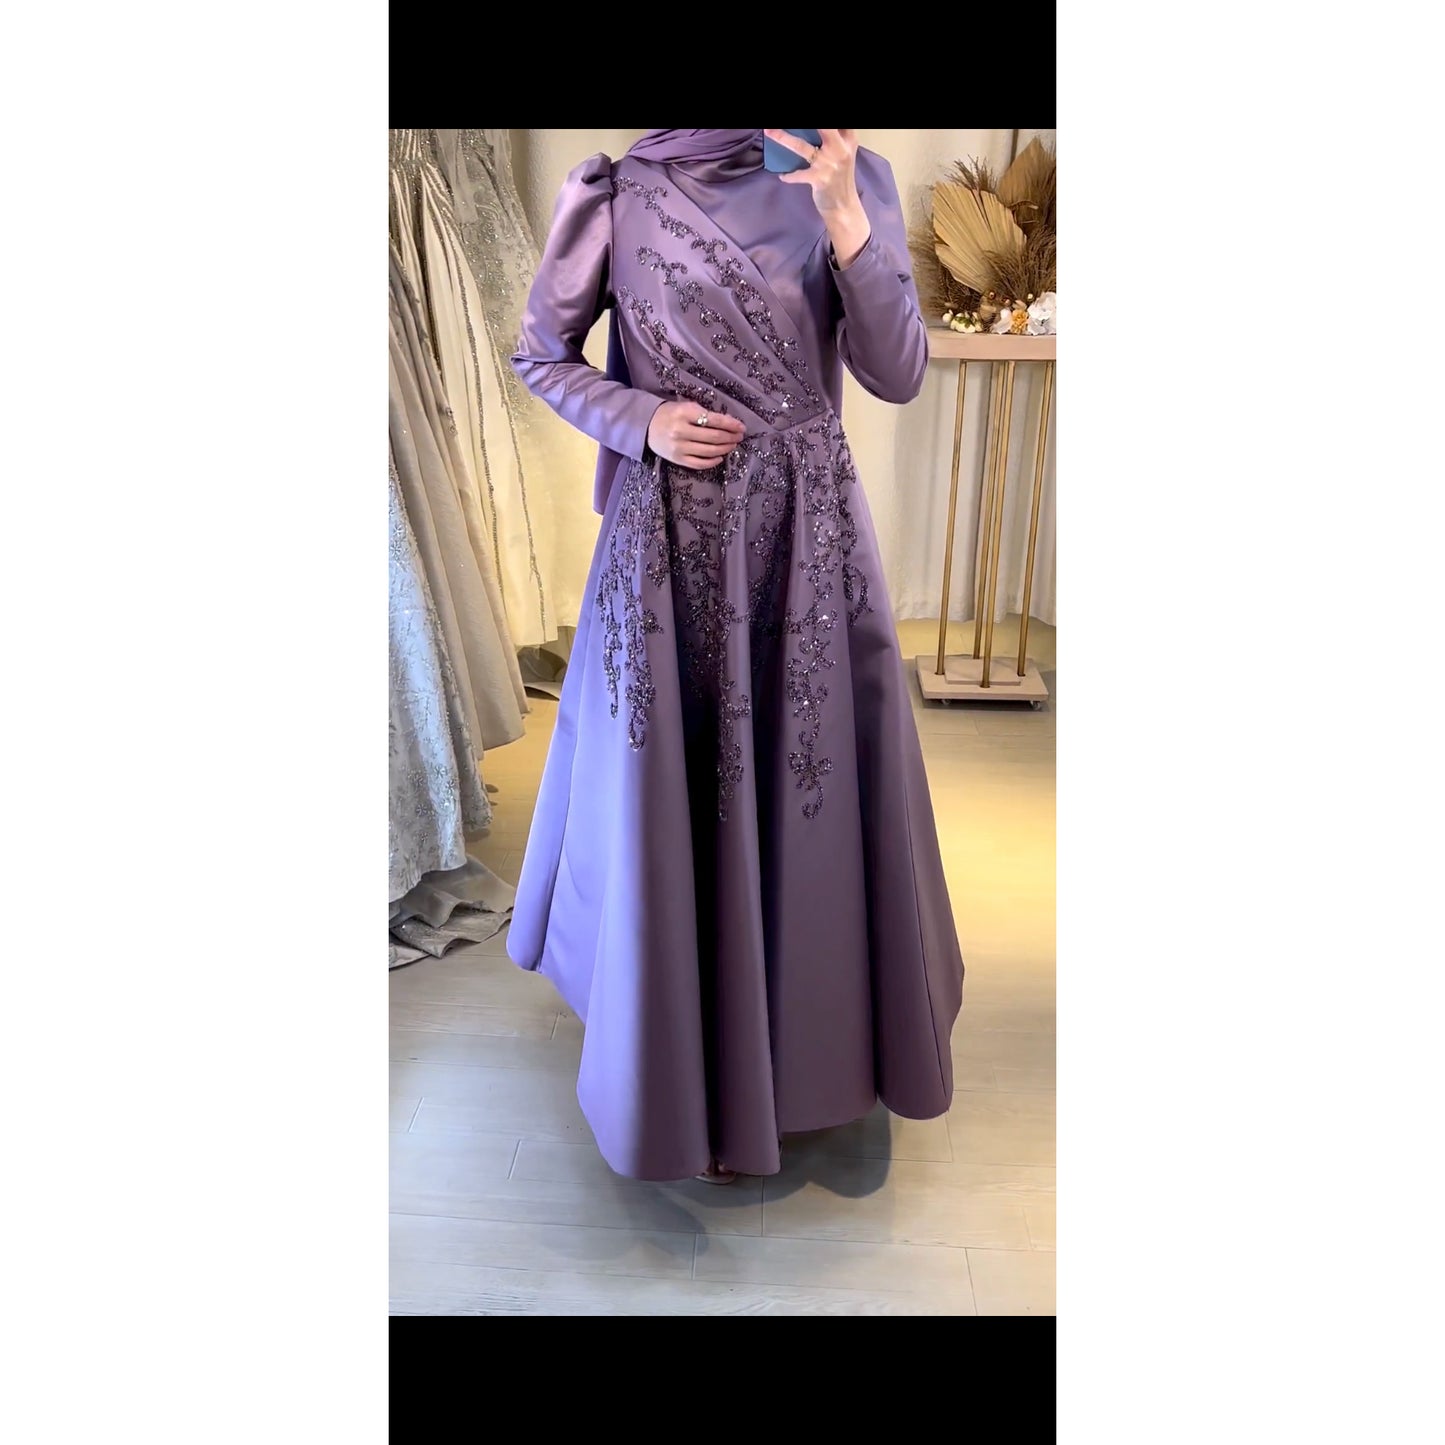 Modest Lavender Embroidered High Neck Maxi Flowing Dress